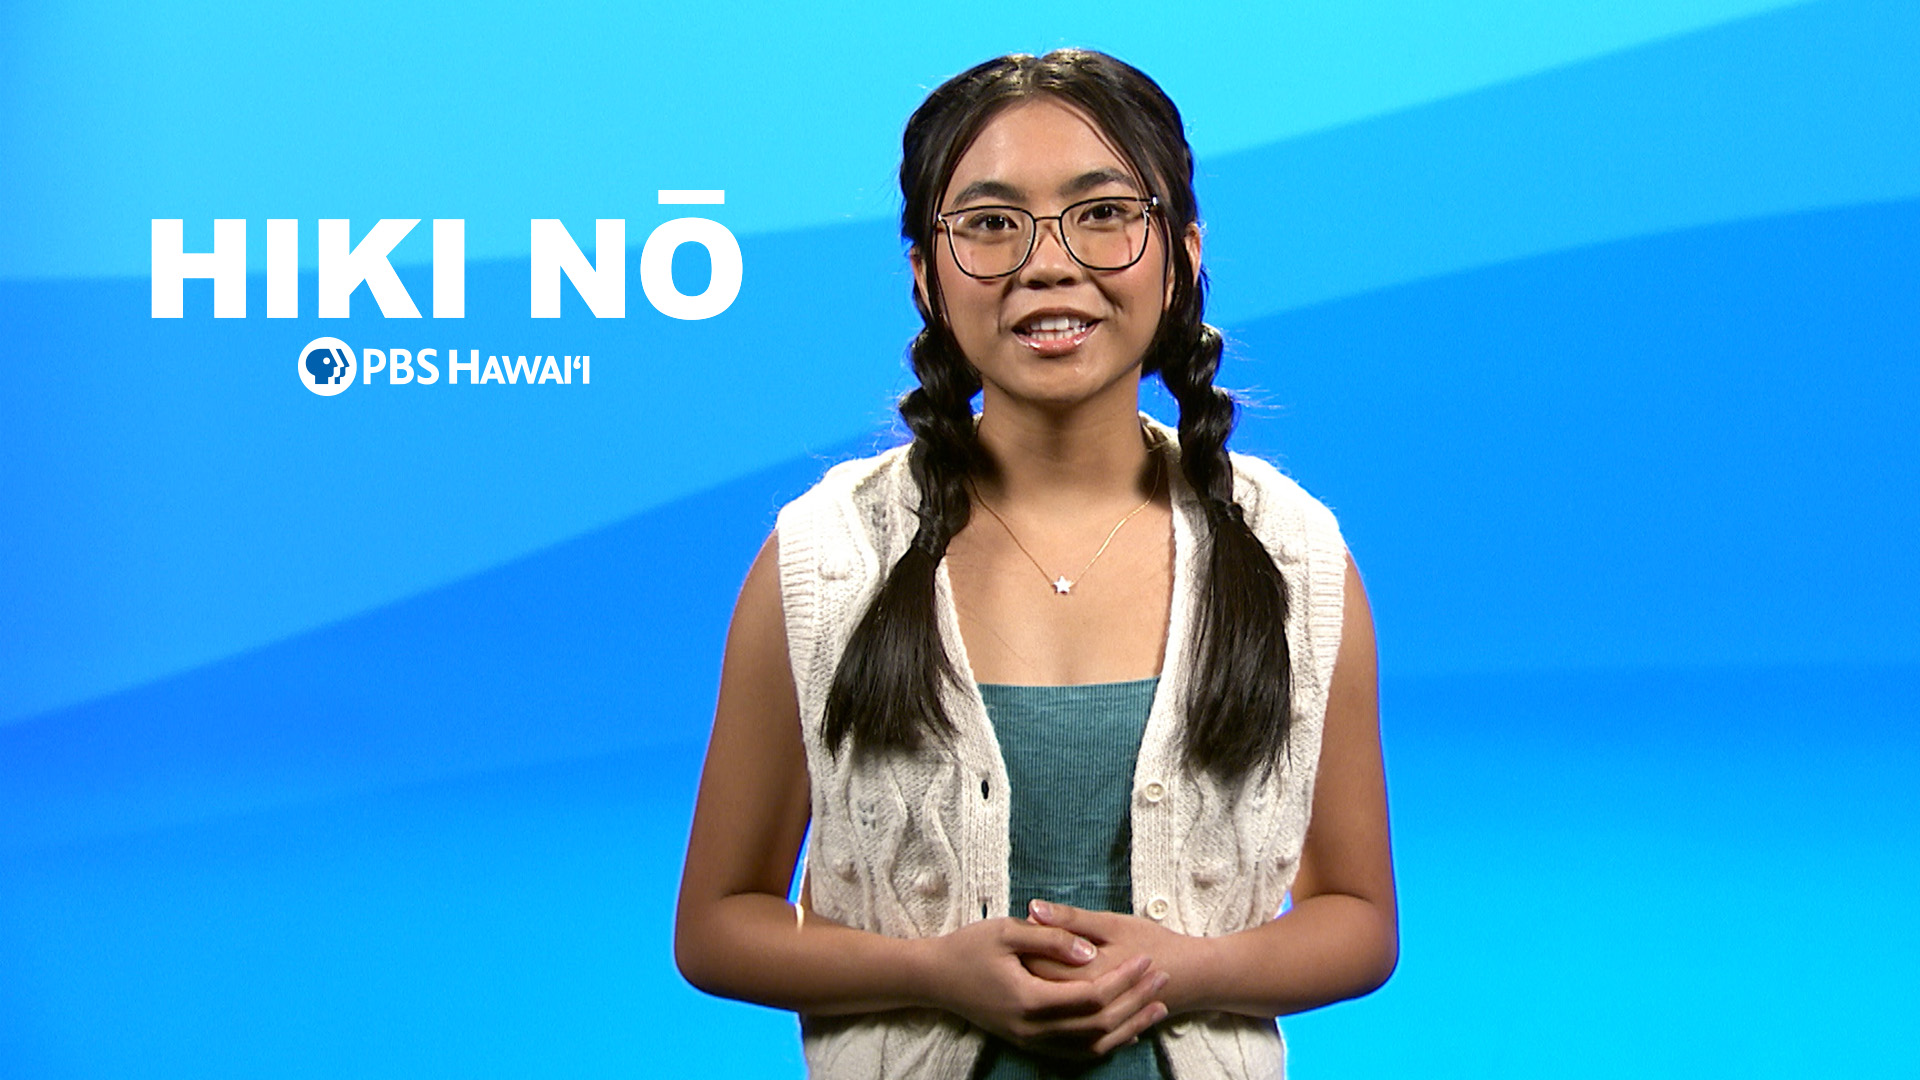 HIKI NŌ ON PBS HAWAIʻI: <br/>Becoming Confident in My Own Skin